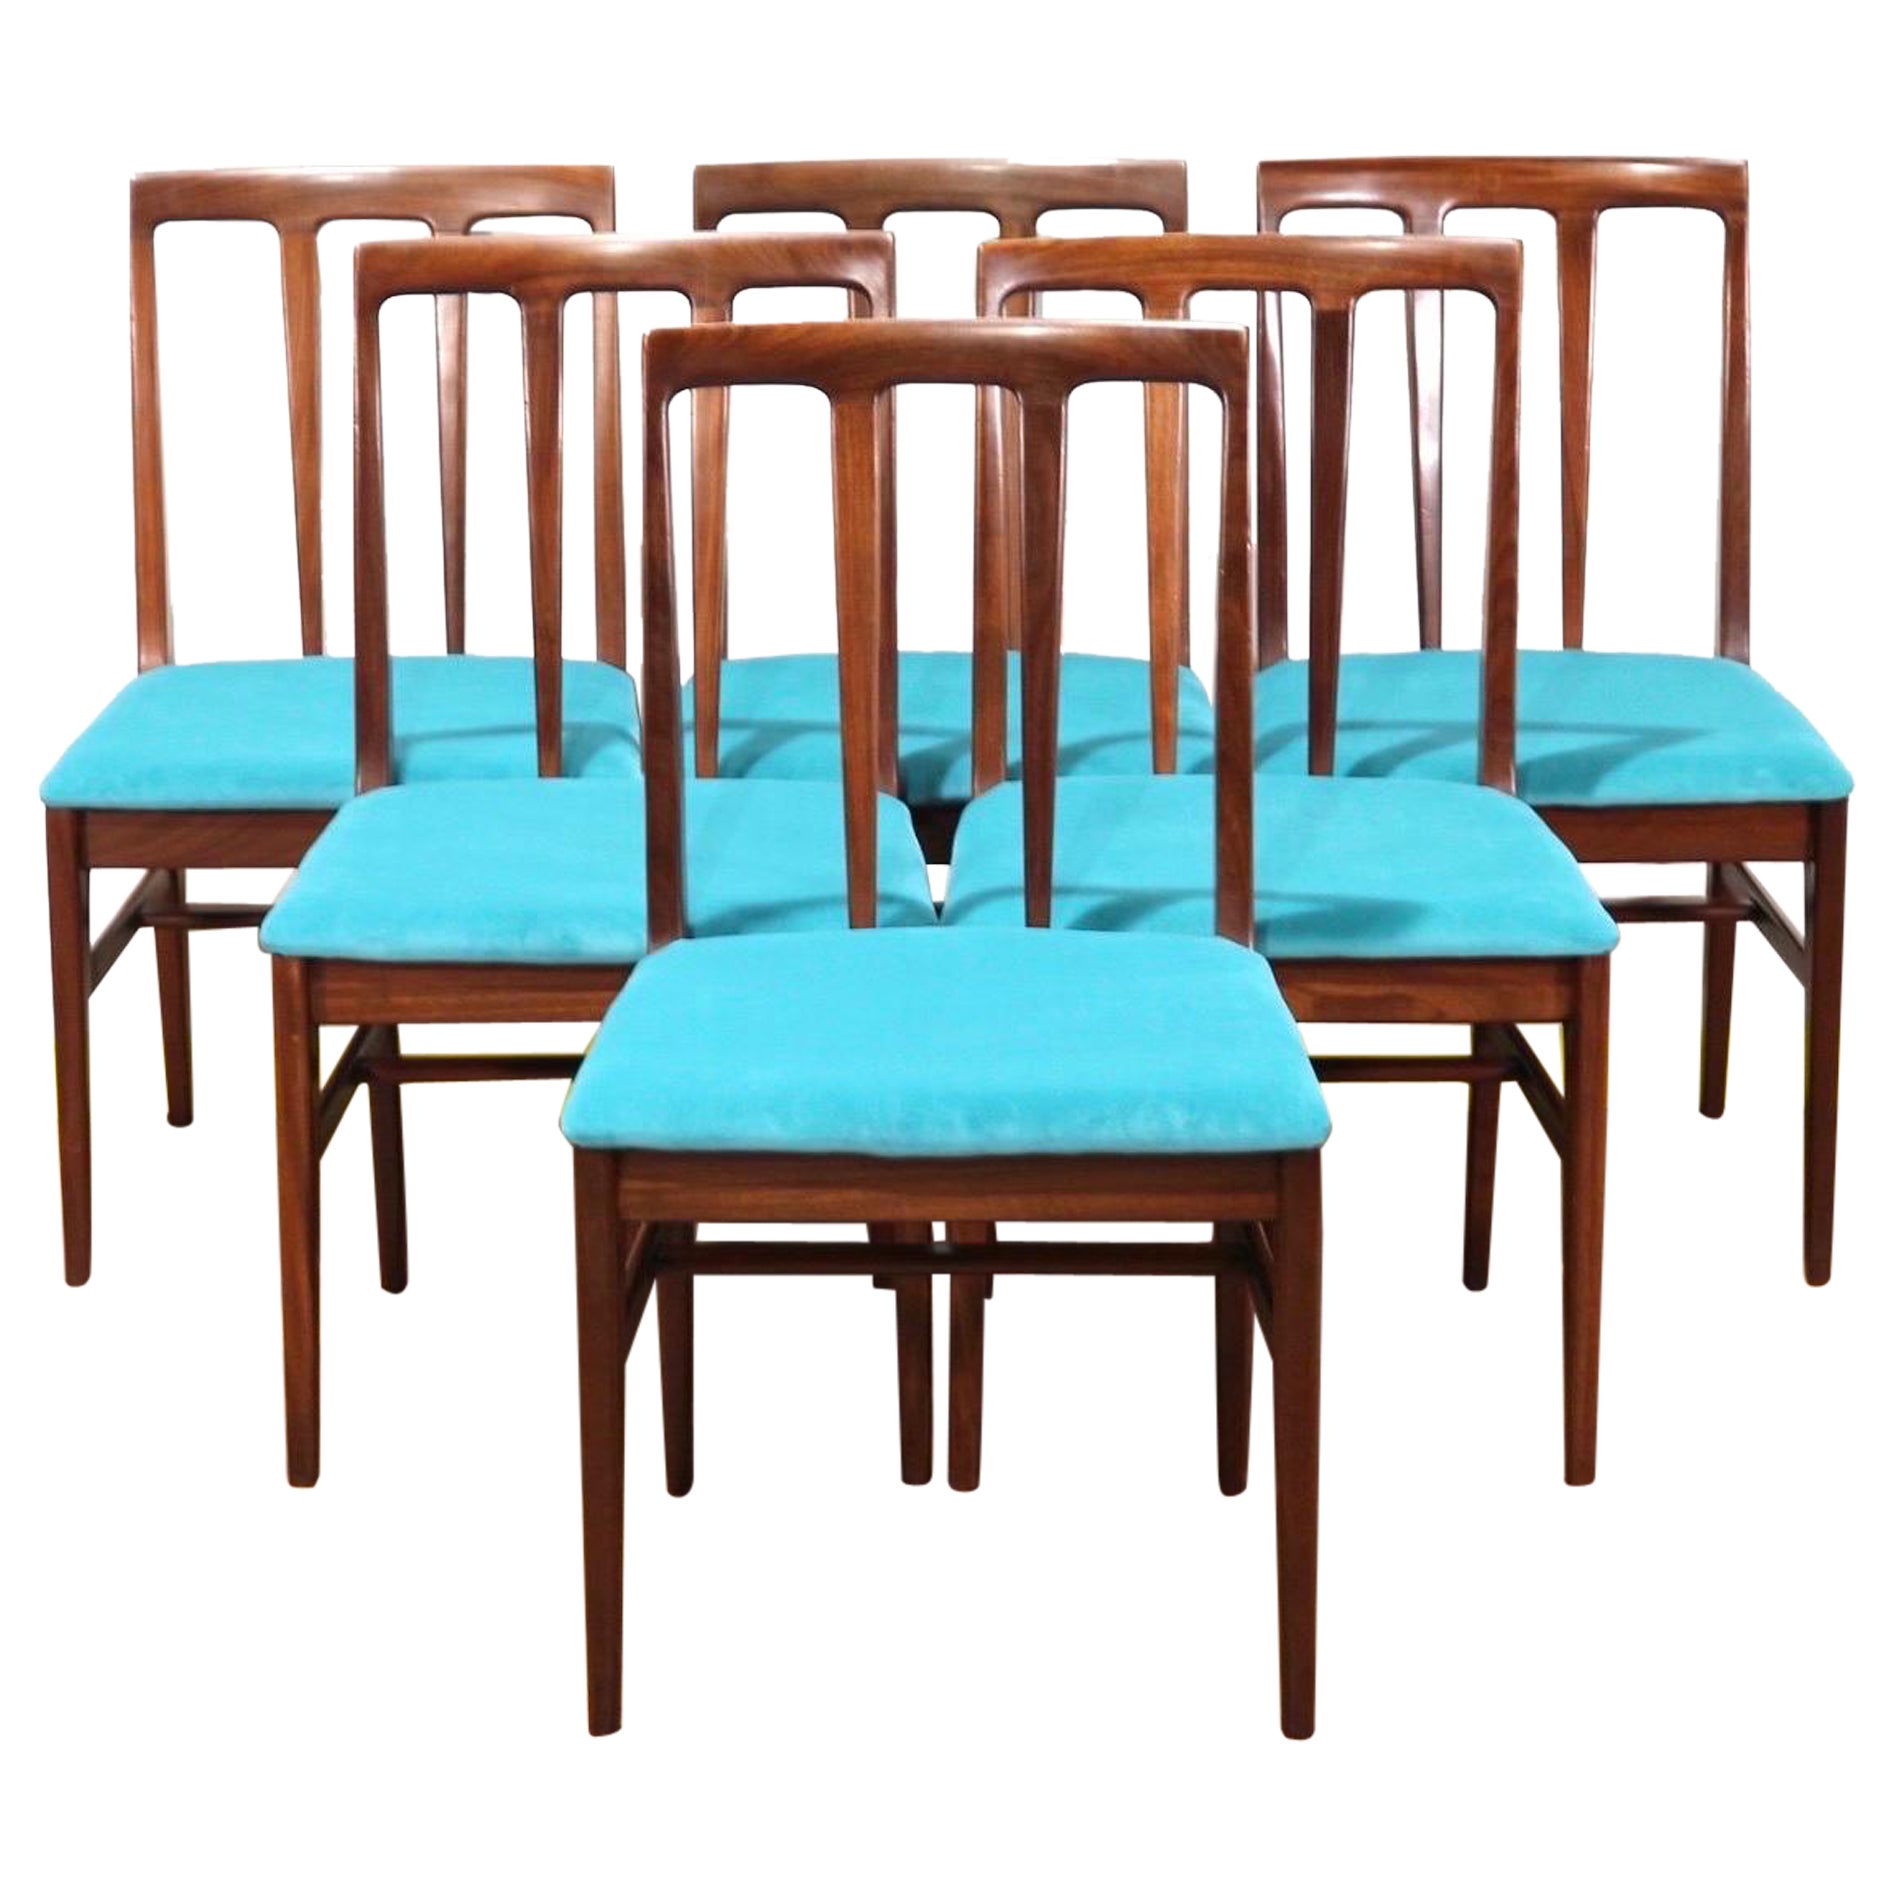 Mid-Century Modern Aromosia Danish Style Dining Chairs by Younger x 6